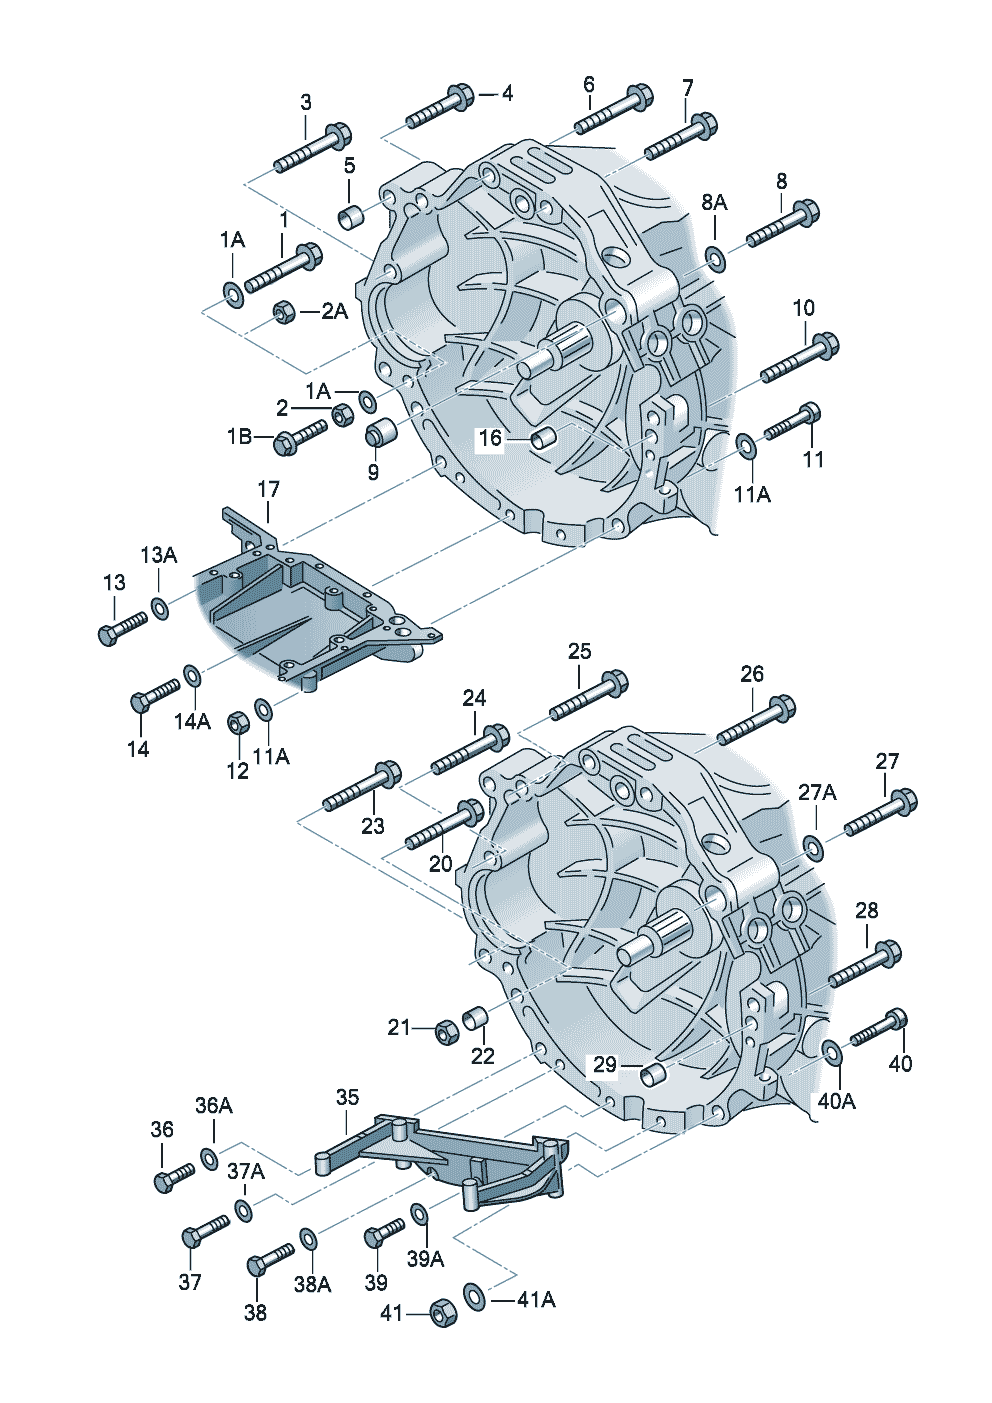 mounting parts for engine and<br>transmissionfor 6 speed manual gearbox 6-cylinder - Audi A8 - a8